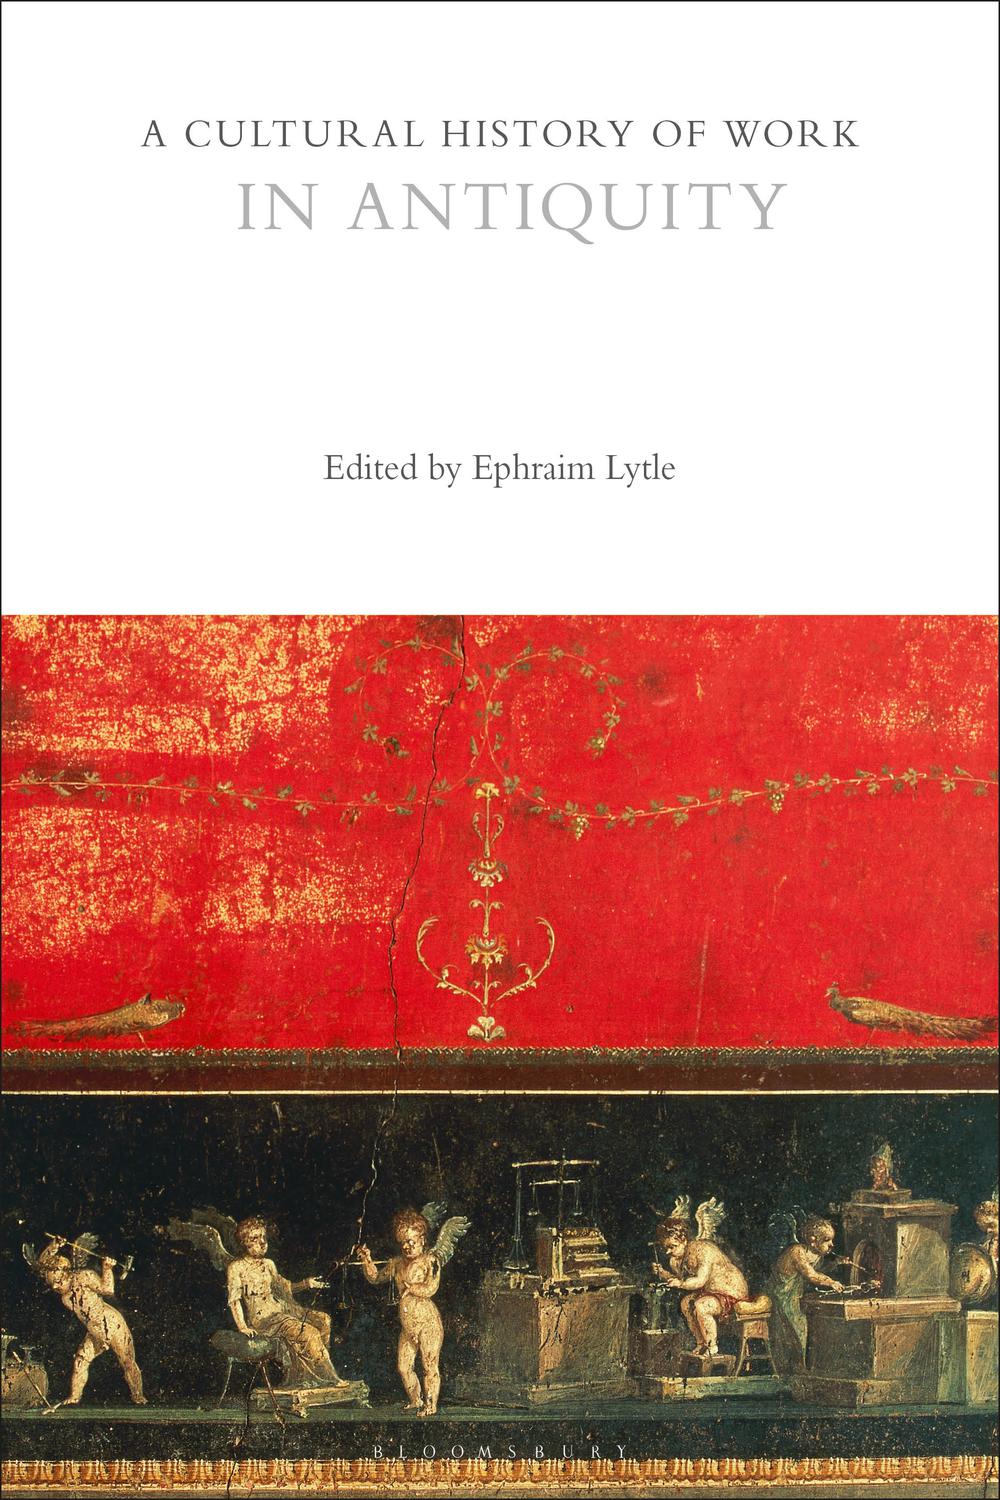 A Cultural History of Work in Antiquity - Ephraim Lytle